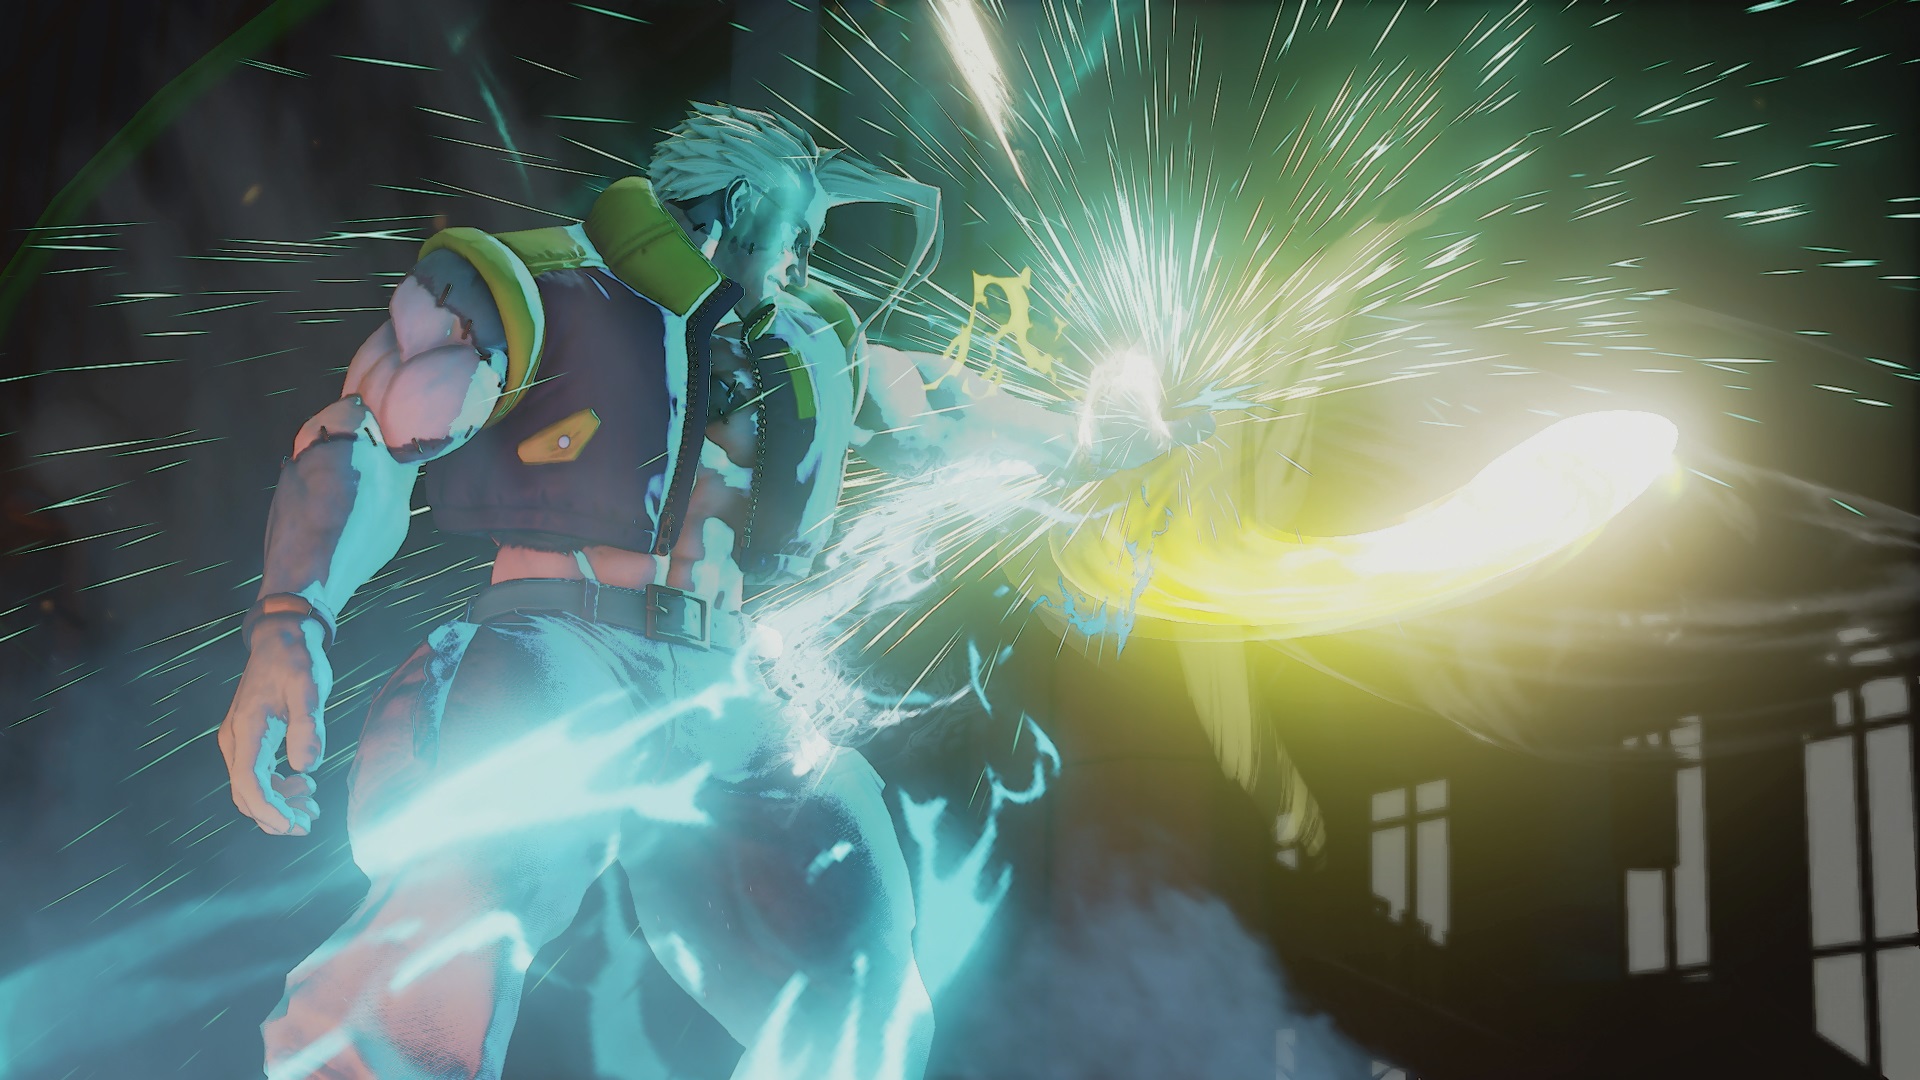 Street Fighter V - A Shadow Falls (Cinematic Story Expansion) Featured Screenshot #1